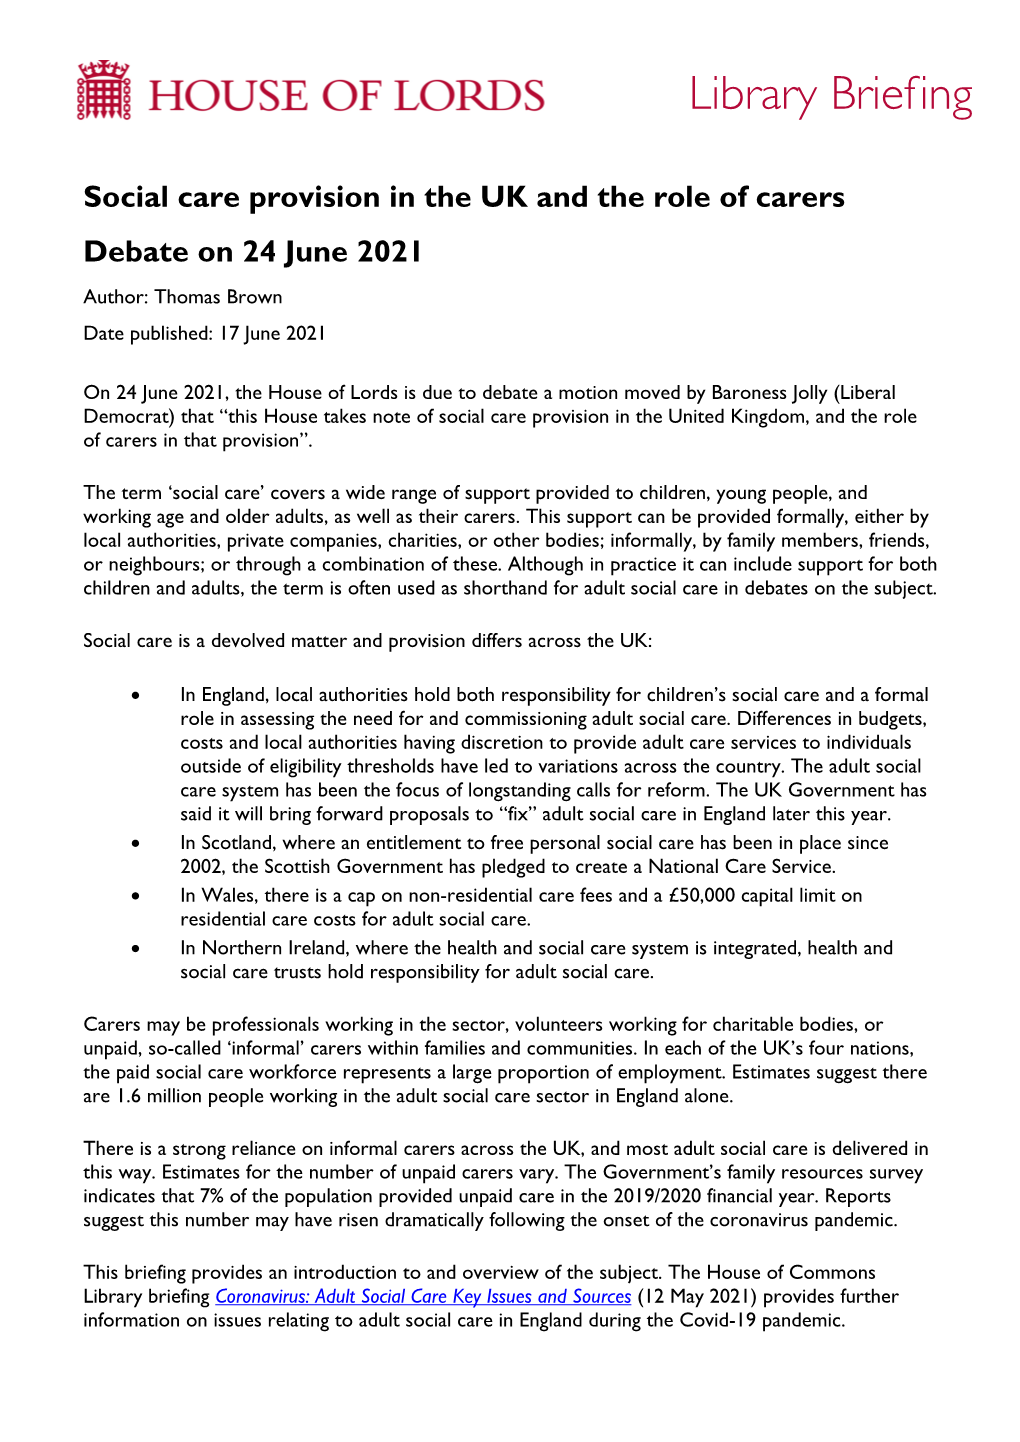 Social Care Provision in the UK and the Role of Carers Debate on 24 June 2021 Author: Thomas Brown Date Published: 17 June 2021